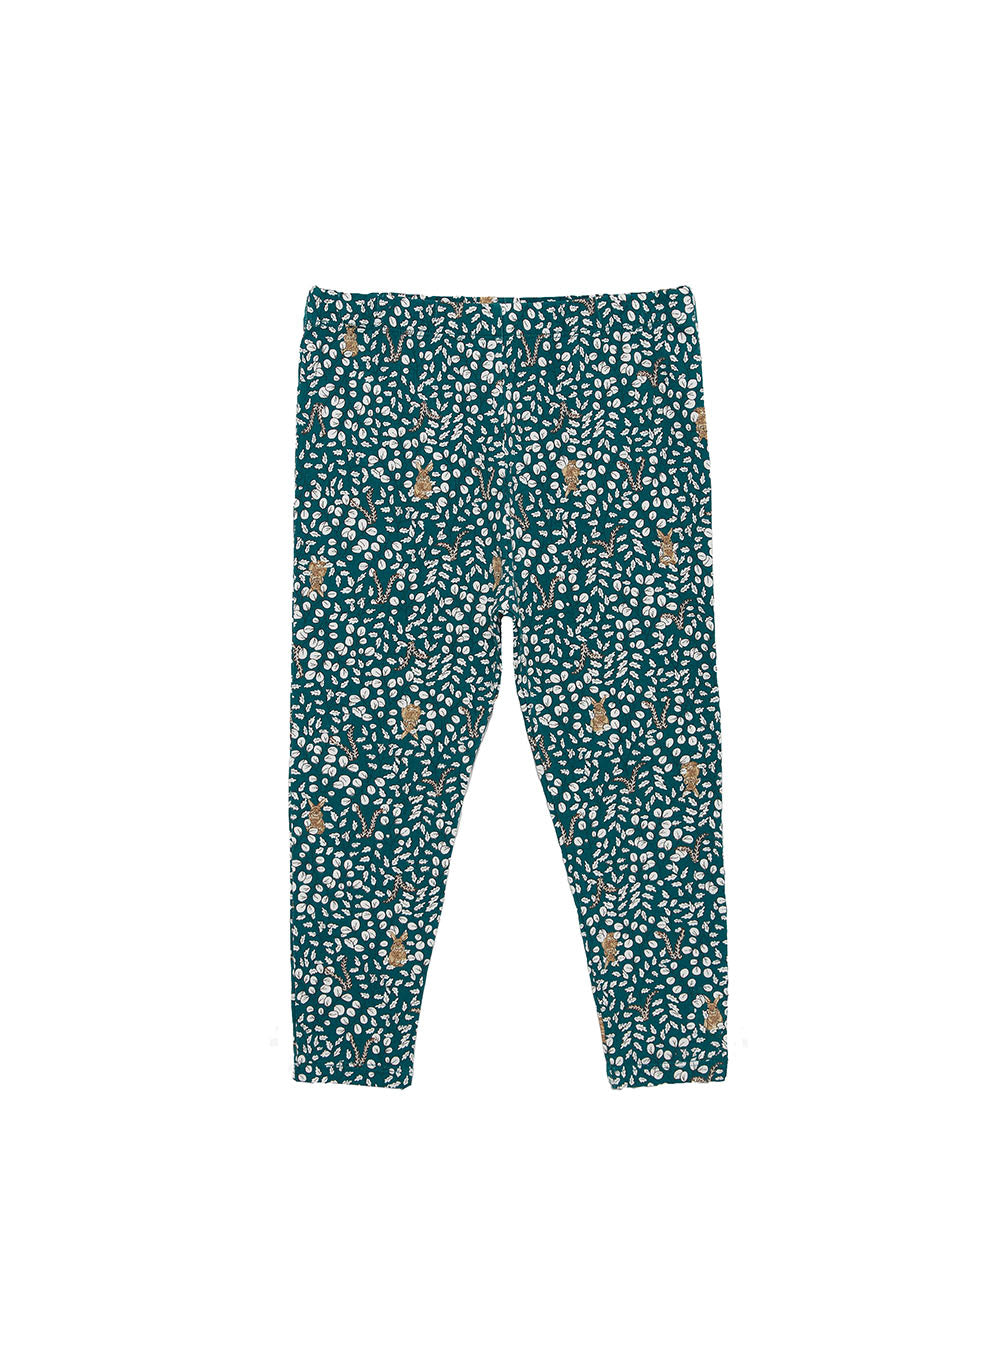 Woodland Bunny Leggings in Forest